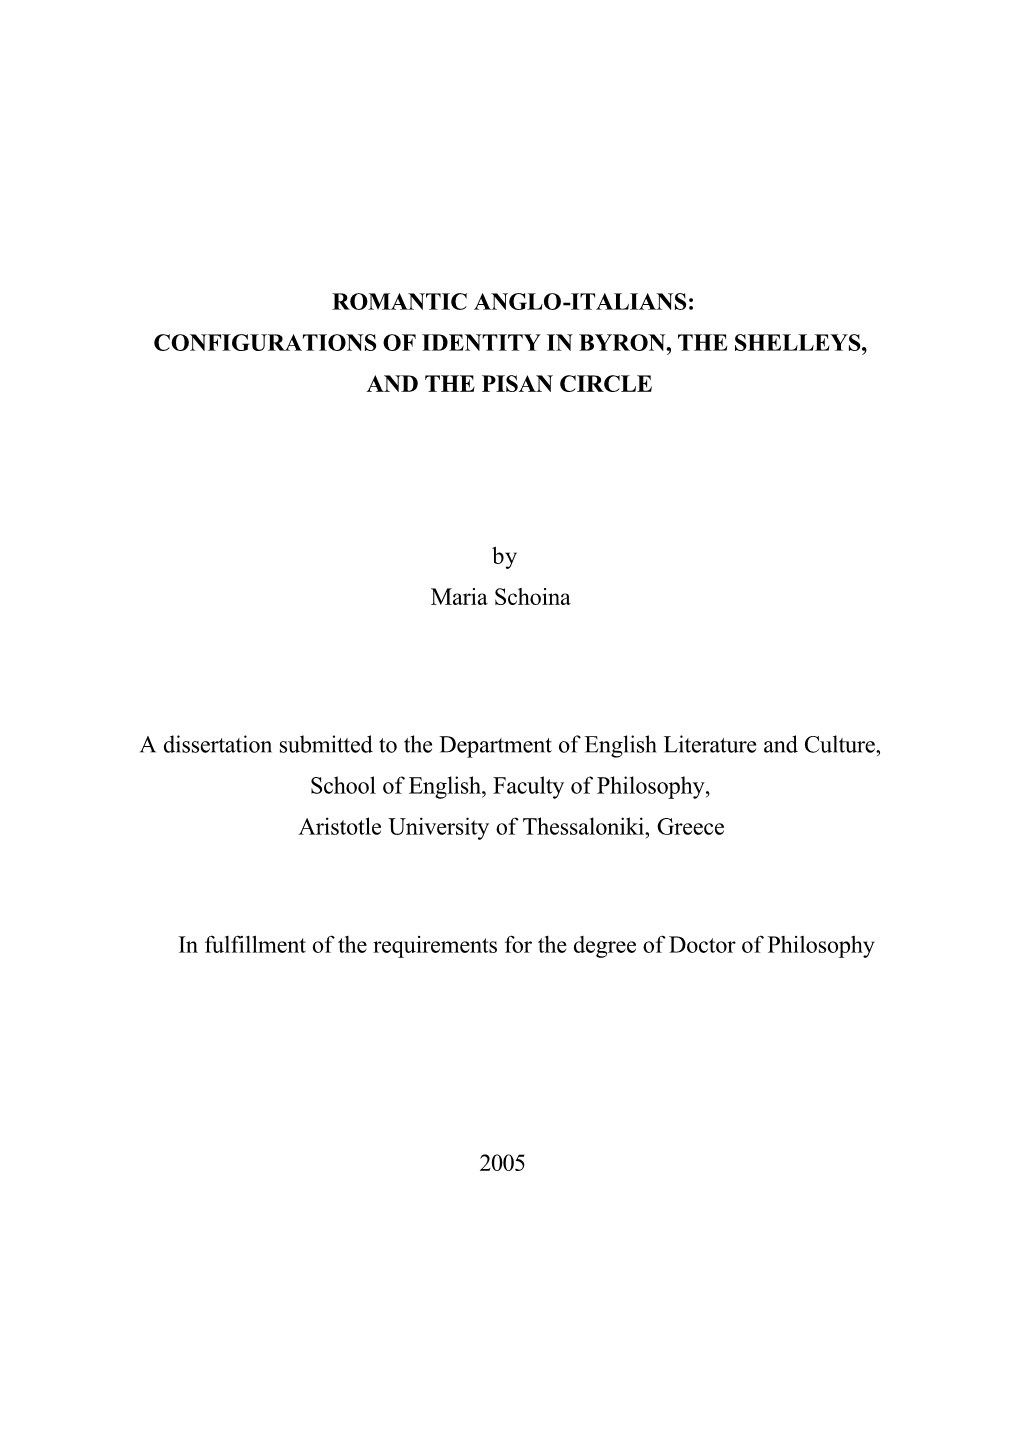 Romantic Anglo-Italians: Configurations of Identity in Byron, the Shelleys, and the Pisan Circle